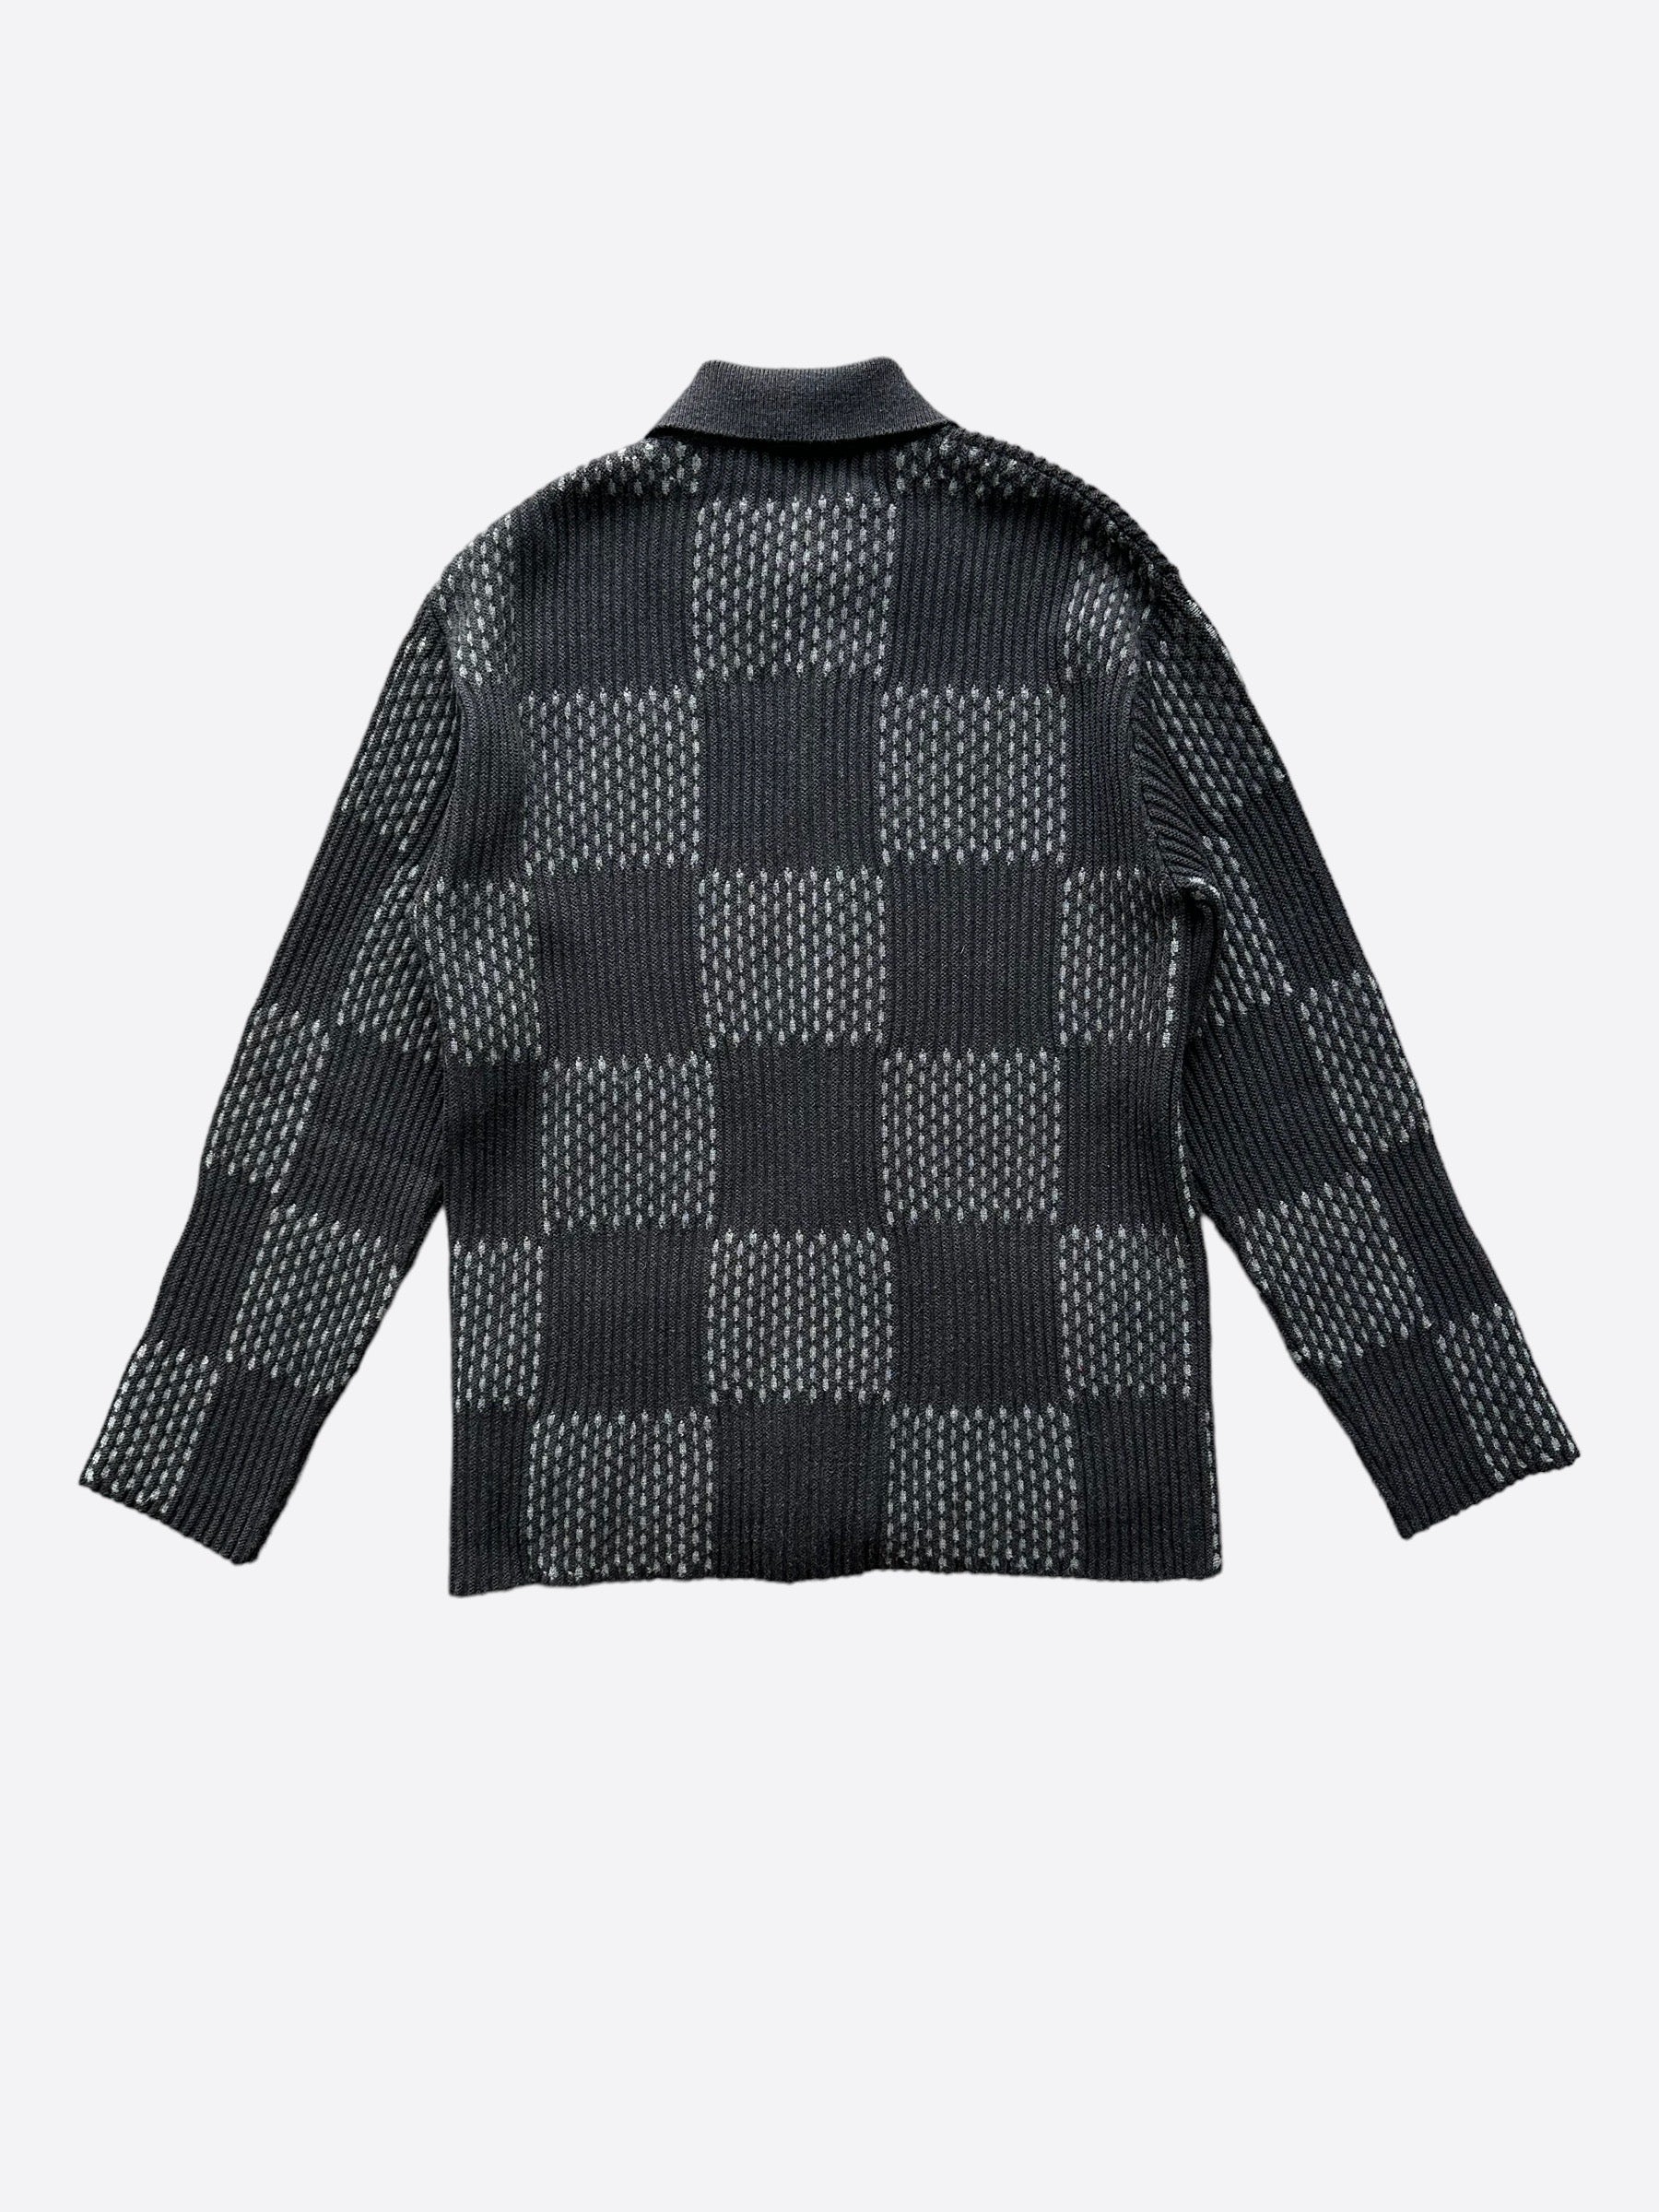 black and white damier louis vuittons